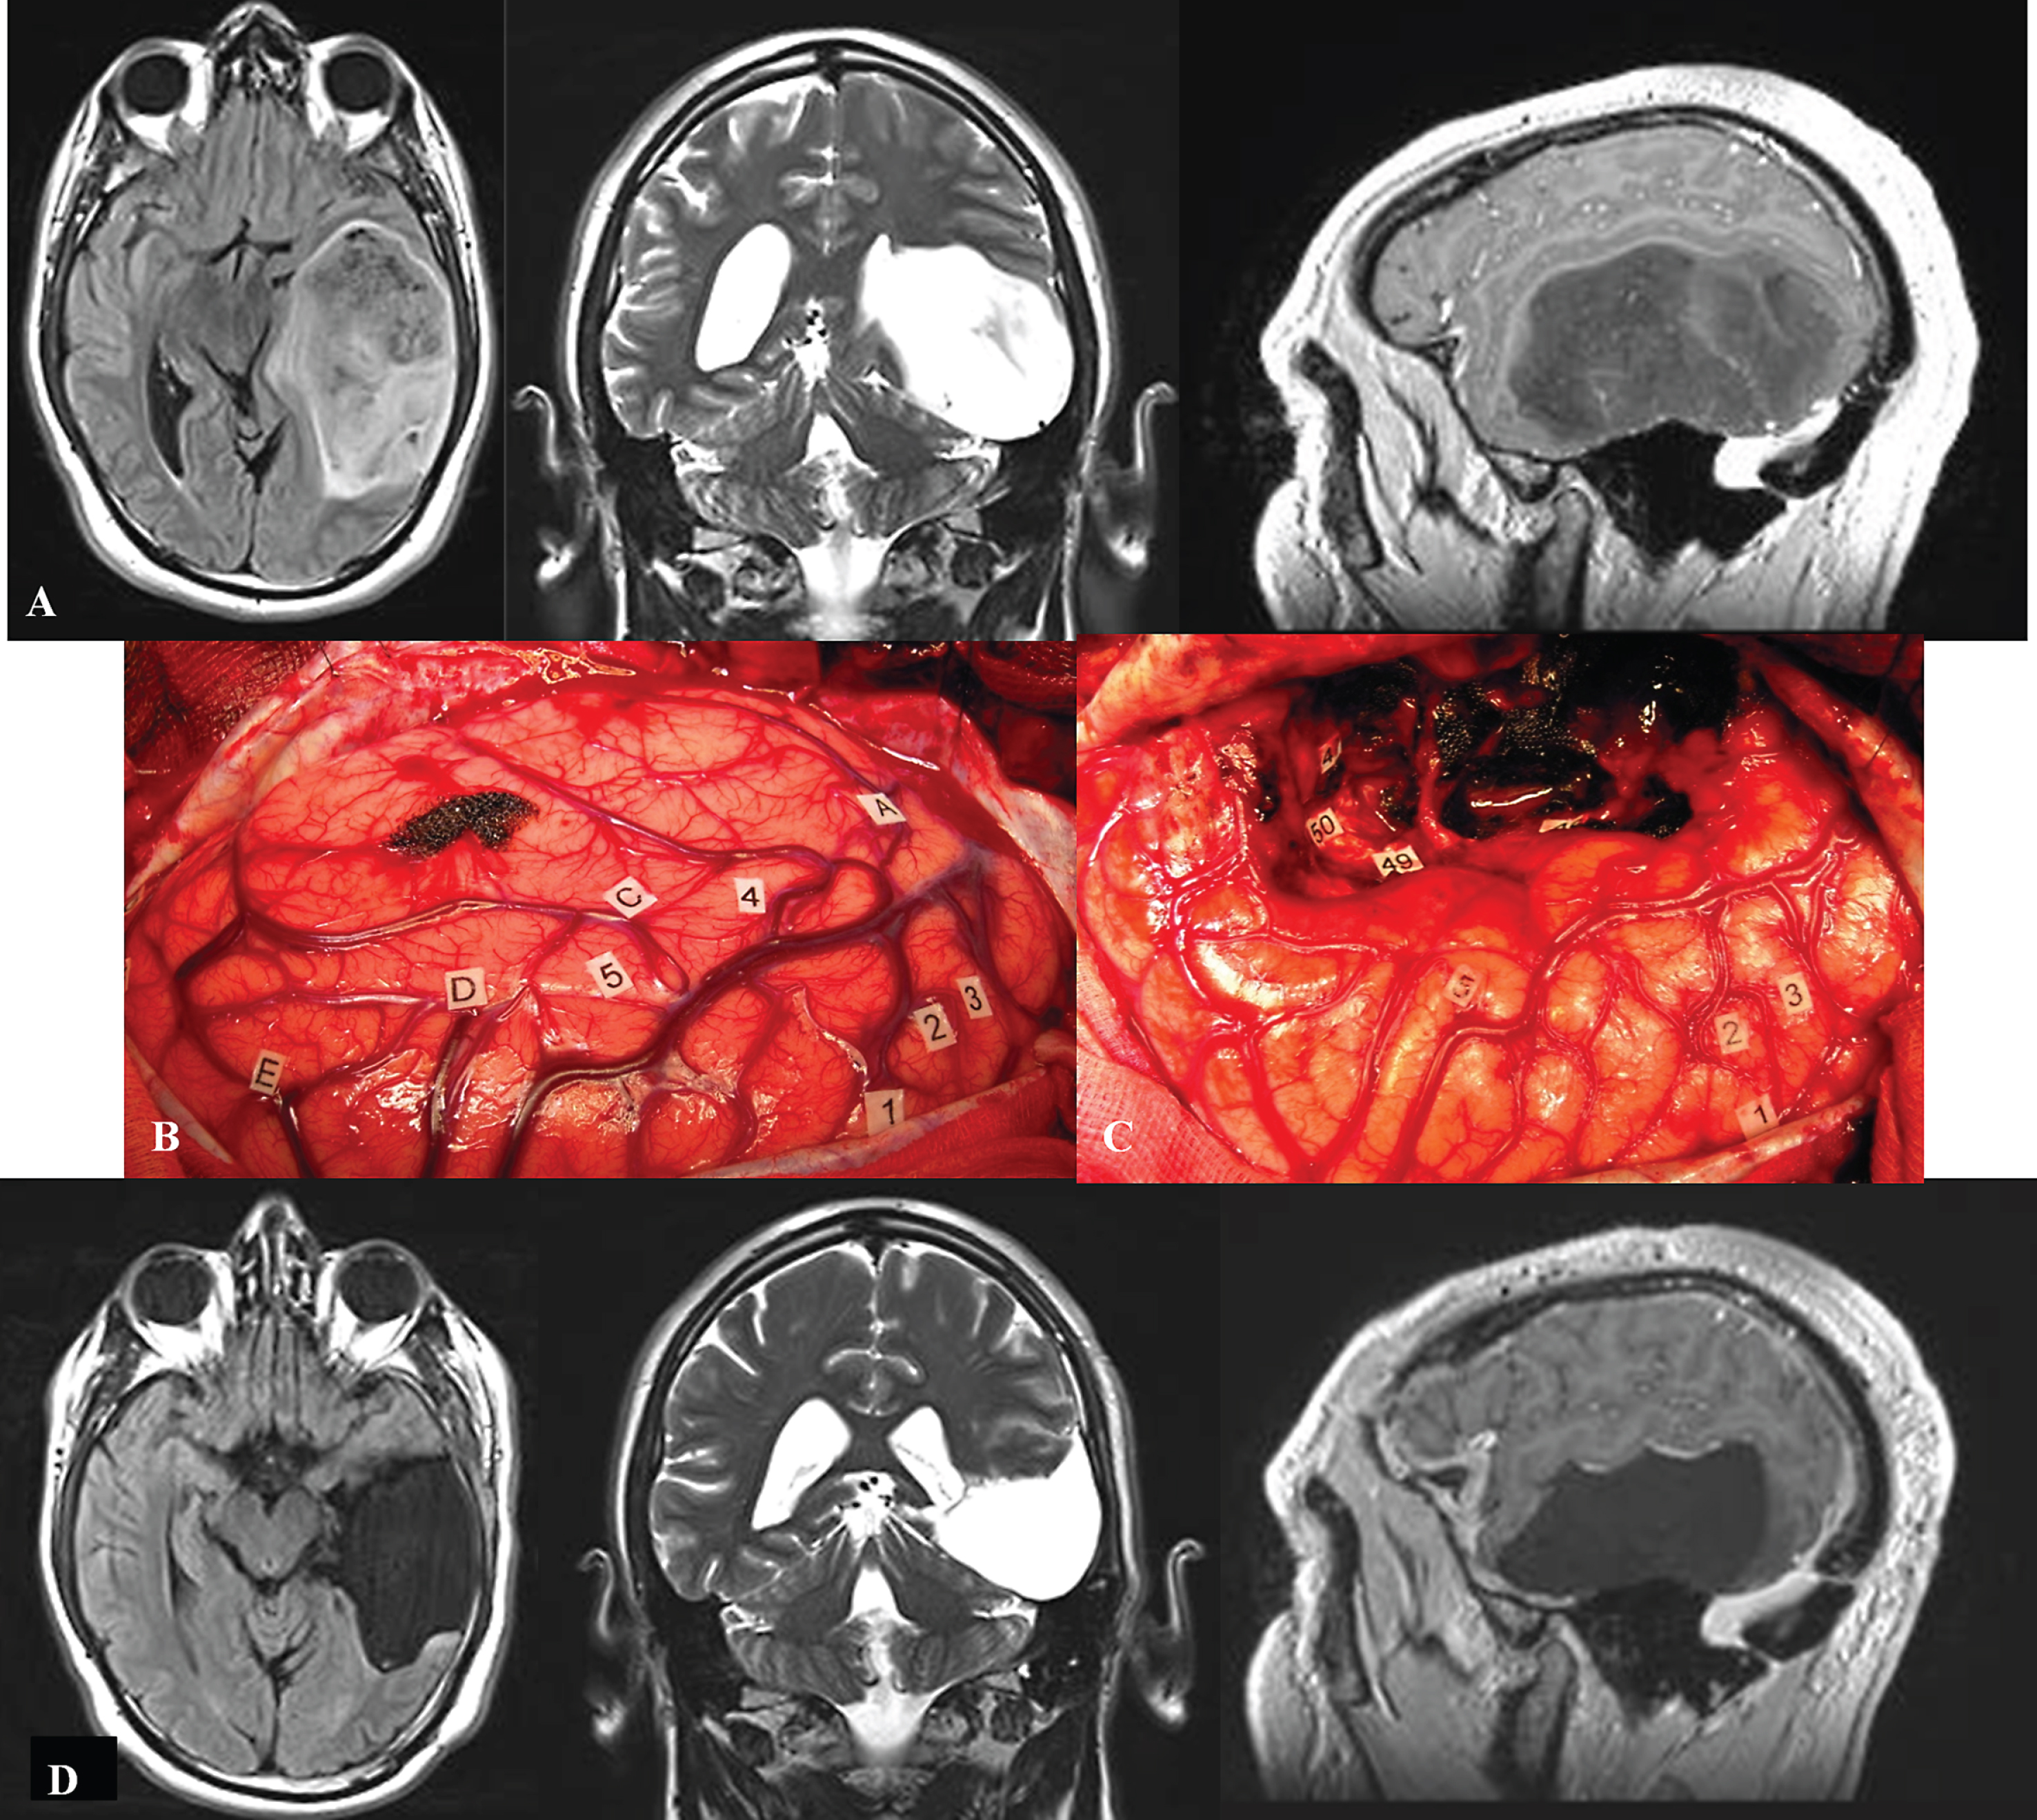 A. Preoperative axial FLAIR-weighted MRI, coronal T2-weighted MRI and sagittal enhanced T1-weighted MRI, in a 42 year-old right-handed male who presented with partial seizures and language disorders on presurgical cognitive examination, showing a voluminous glioma involving the left temporal lobe. B: Intraoperative view before resection. The anterior part of the left hemisphere is on the right and its posterior part is on the left. Letter tags correspond to the projection on the cortical surface of the tumor limits identified using ultrasonography. Number tags show zones of positive DES mapping as follows, 1, 2 and 3: ventral premotor cortex (generating anarthria during DES); 4 (mid-part of the superior temporal gyrus): areas involved in lexical access (eliciting anomia during DES); 5 (posterior part of the superior temporal gyrus): areas involved in semantic processing (inducing semantic paraphasia during DES). C: Intraoperative view after resection, achieved up to eloquent structures, both at cortical and subcortical levels. Indeed, DES of white matter tracts allowed the detection of the ventral stream underpinned by the IFOF (eliciting semantic paraphasias when stimulated, tag 46); the detection of the inferior longitudinal fascicle (anterior part of the posterior segment, generating reading disturbances during DES, tag 47); the optic radiations more deeply located (inducing transient visual disturbances when stimulated, tag 50); as well as the detection of the temporal part of the SLF subserving the dorsal stream (eliciting phonological disorders when stimulated, tag 49). D: Immediate axial FLAIR-weighted MRI, coronal T2-weighted MRI and sagittal enhanced T1-weighted MRI, showing a complete tumor removal. The patient benefited from a cognitive rehabilitation within the weeks following resection, and improved in comparison with the presurgical status, on the postsurgical language assessment achieved 3 months later. The diagnosis of low-grade glioma was confirmed, and no adjuvant oncological treatment was administrated. The patient resumed a normal familial, social and professional life within 3 months following surgery, with no functional deficits (no neurological and no cognitive disorders, no seizures) thanks to the preservation of the subcortical connectivity - despite an extensive resection of the temporal lobe in the left hemisphere.